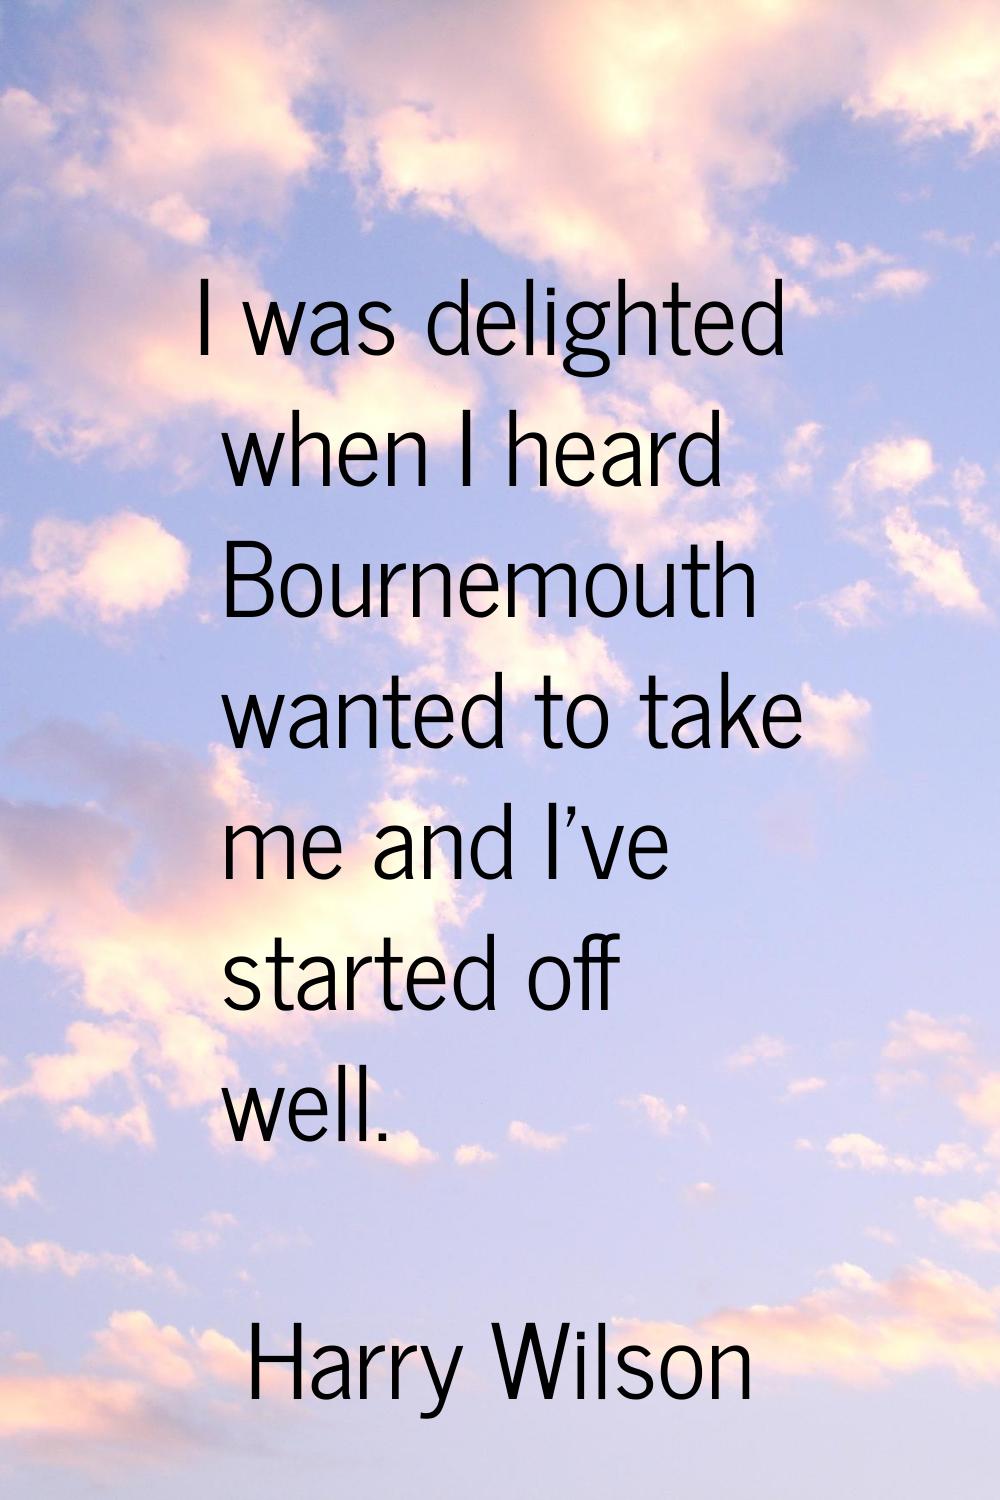 I was delighted when I heard Bournemouth wanted to take me and I've started off well.